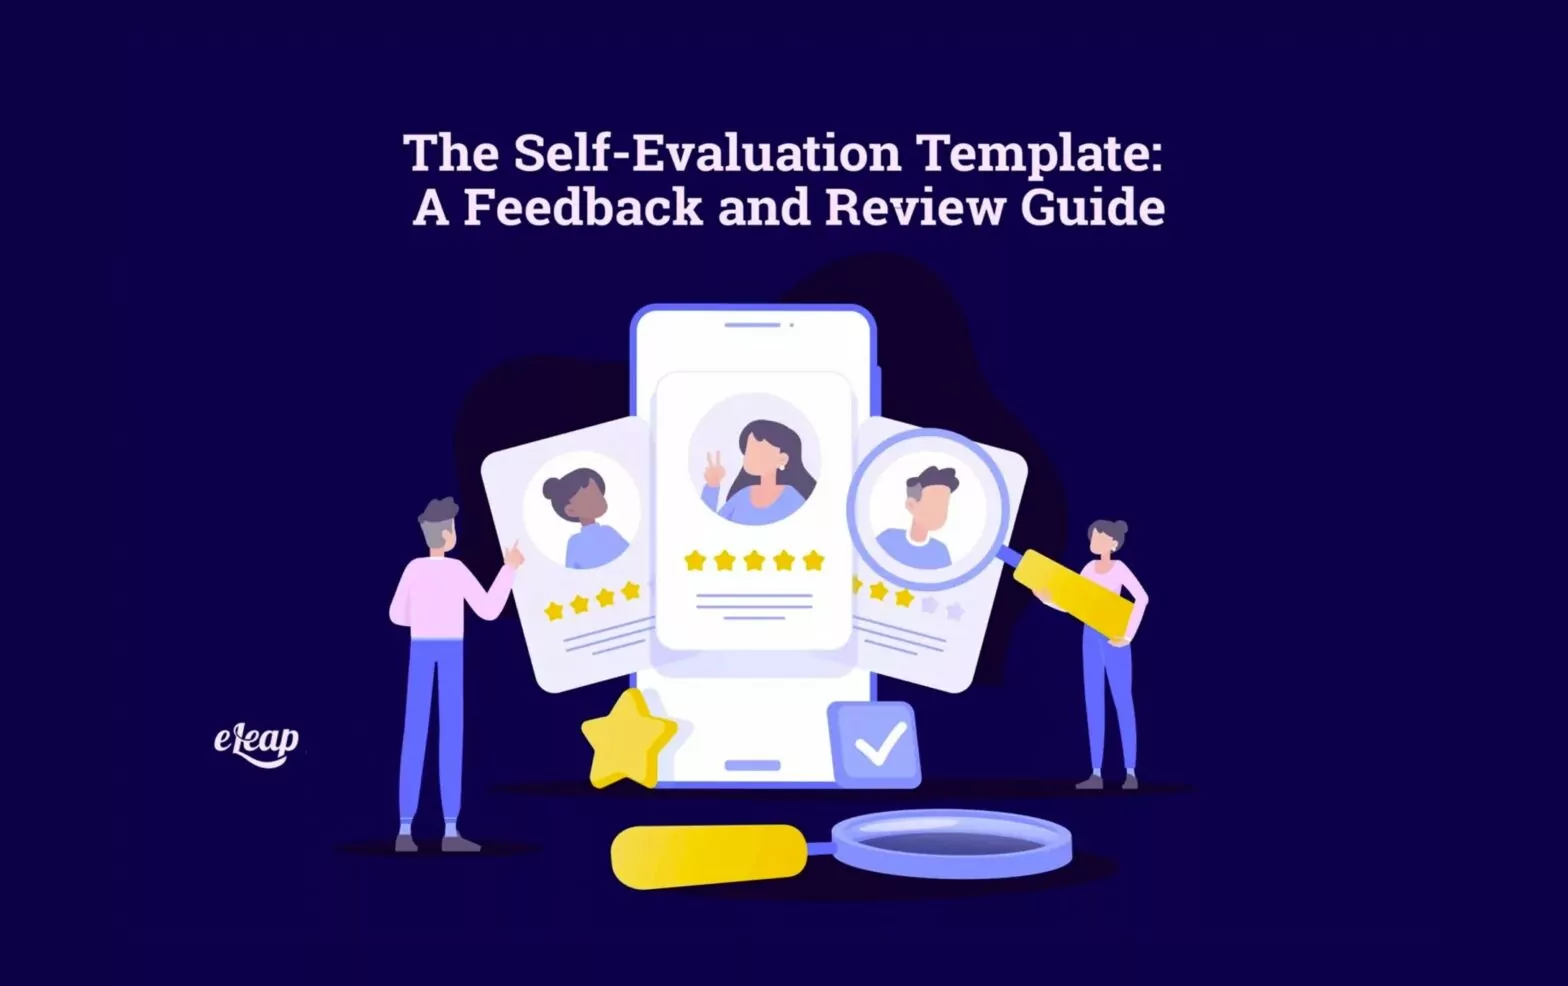 The Self-Evaluation Template: A Feedback and Review Guide